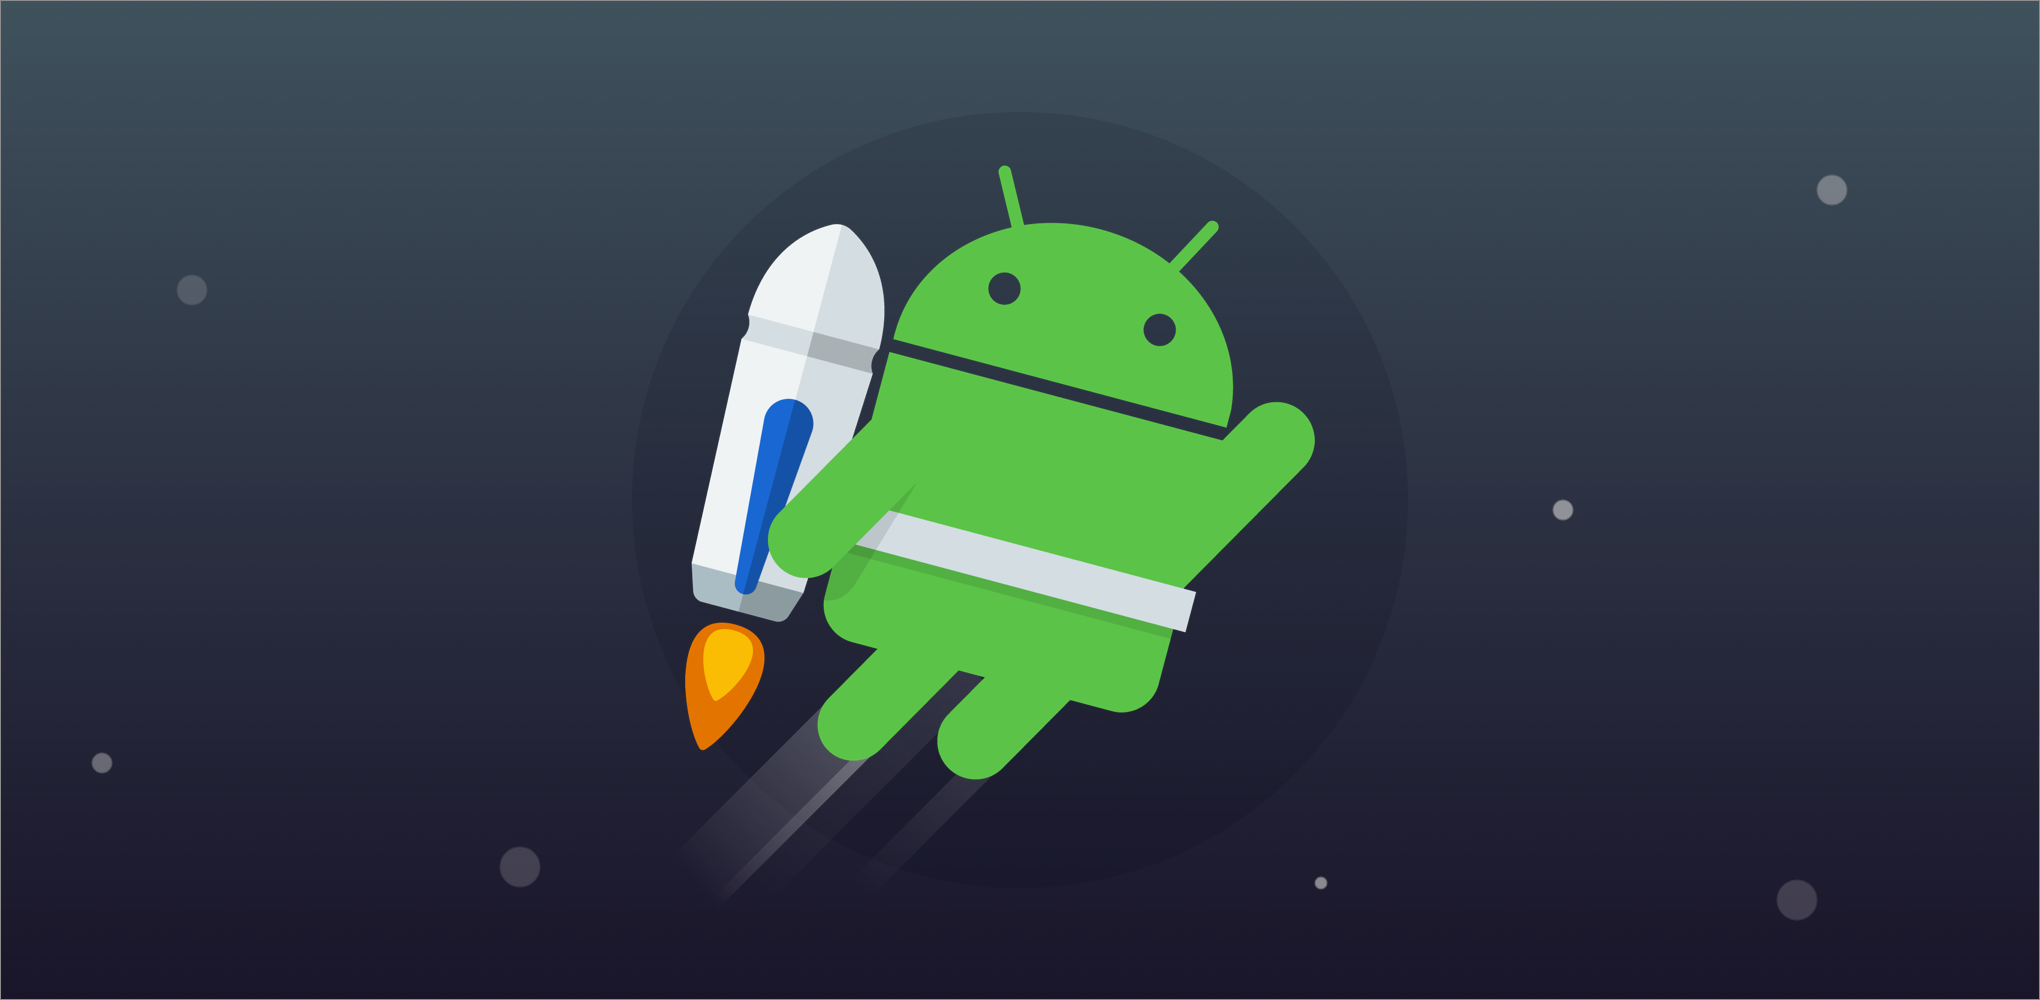 How to use android jetpack?